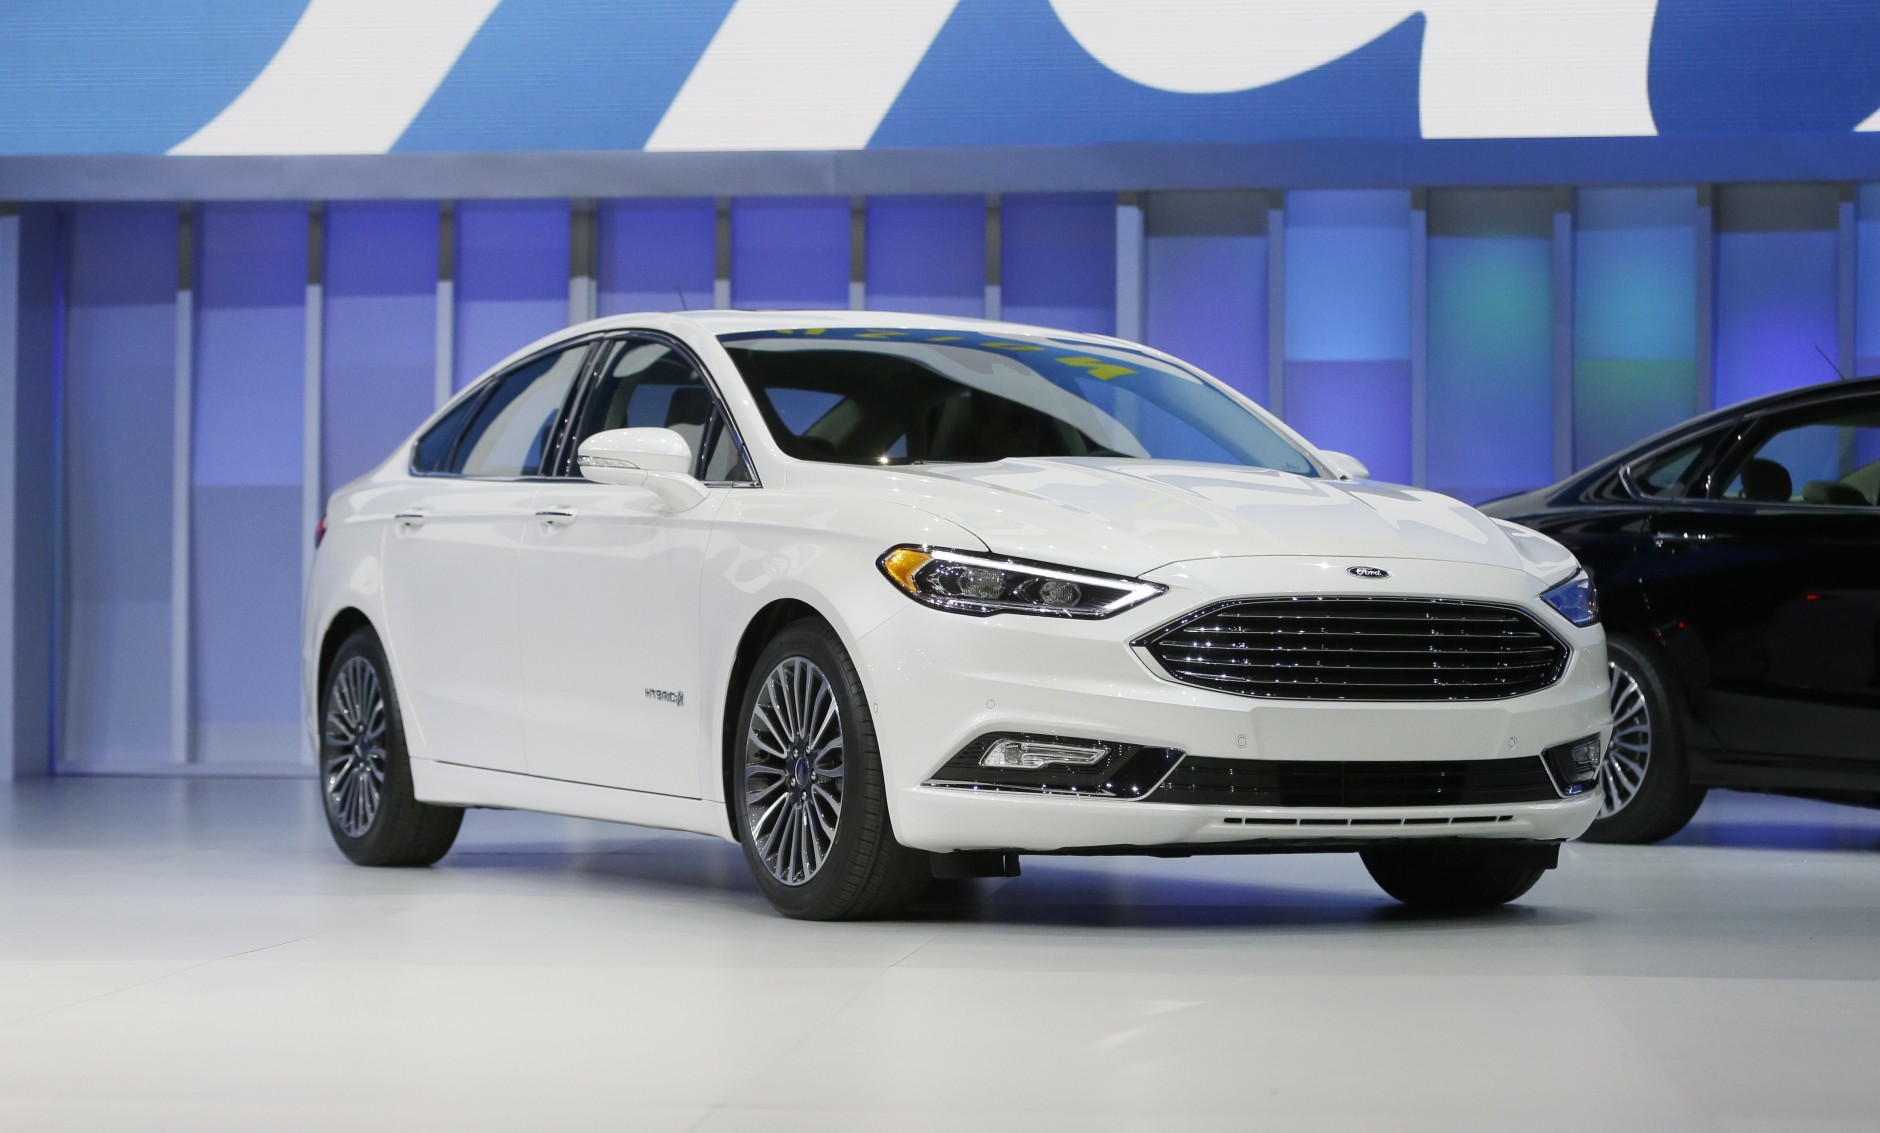 The Ford Fusion hybrid is displayed at the North American International Auto Show, Monday, Jan. 11, 2016, in Detroit. (AP Photo/Carlos Osorio)